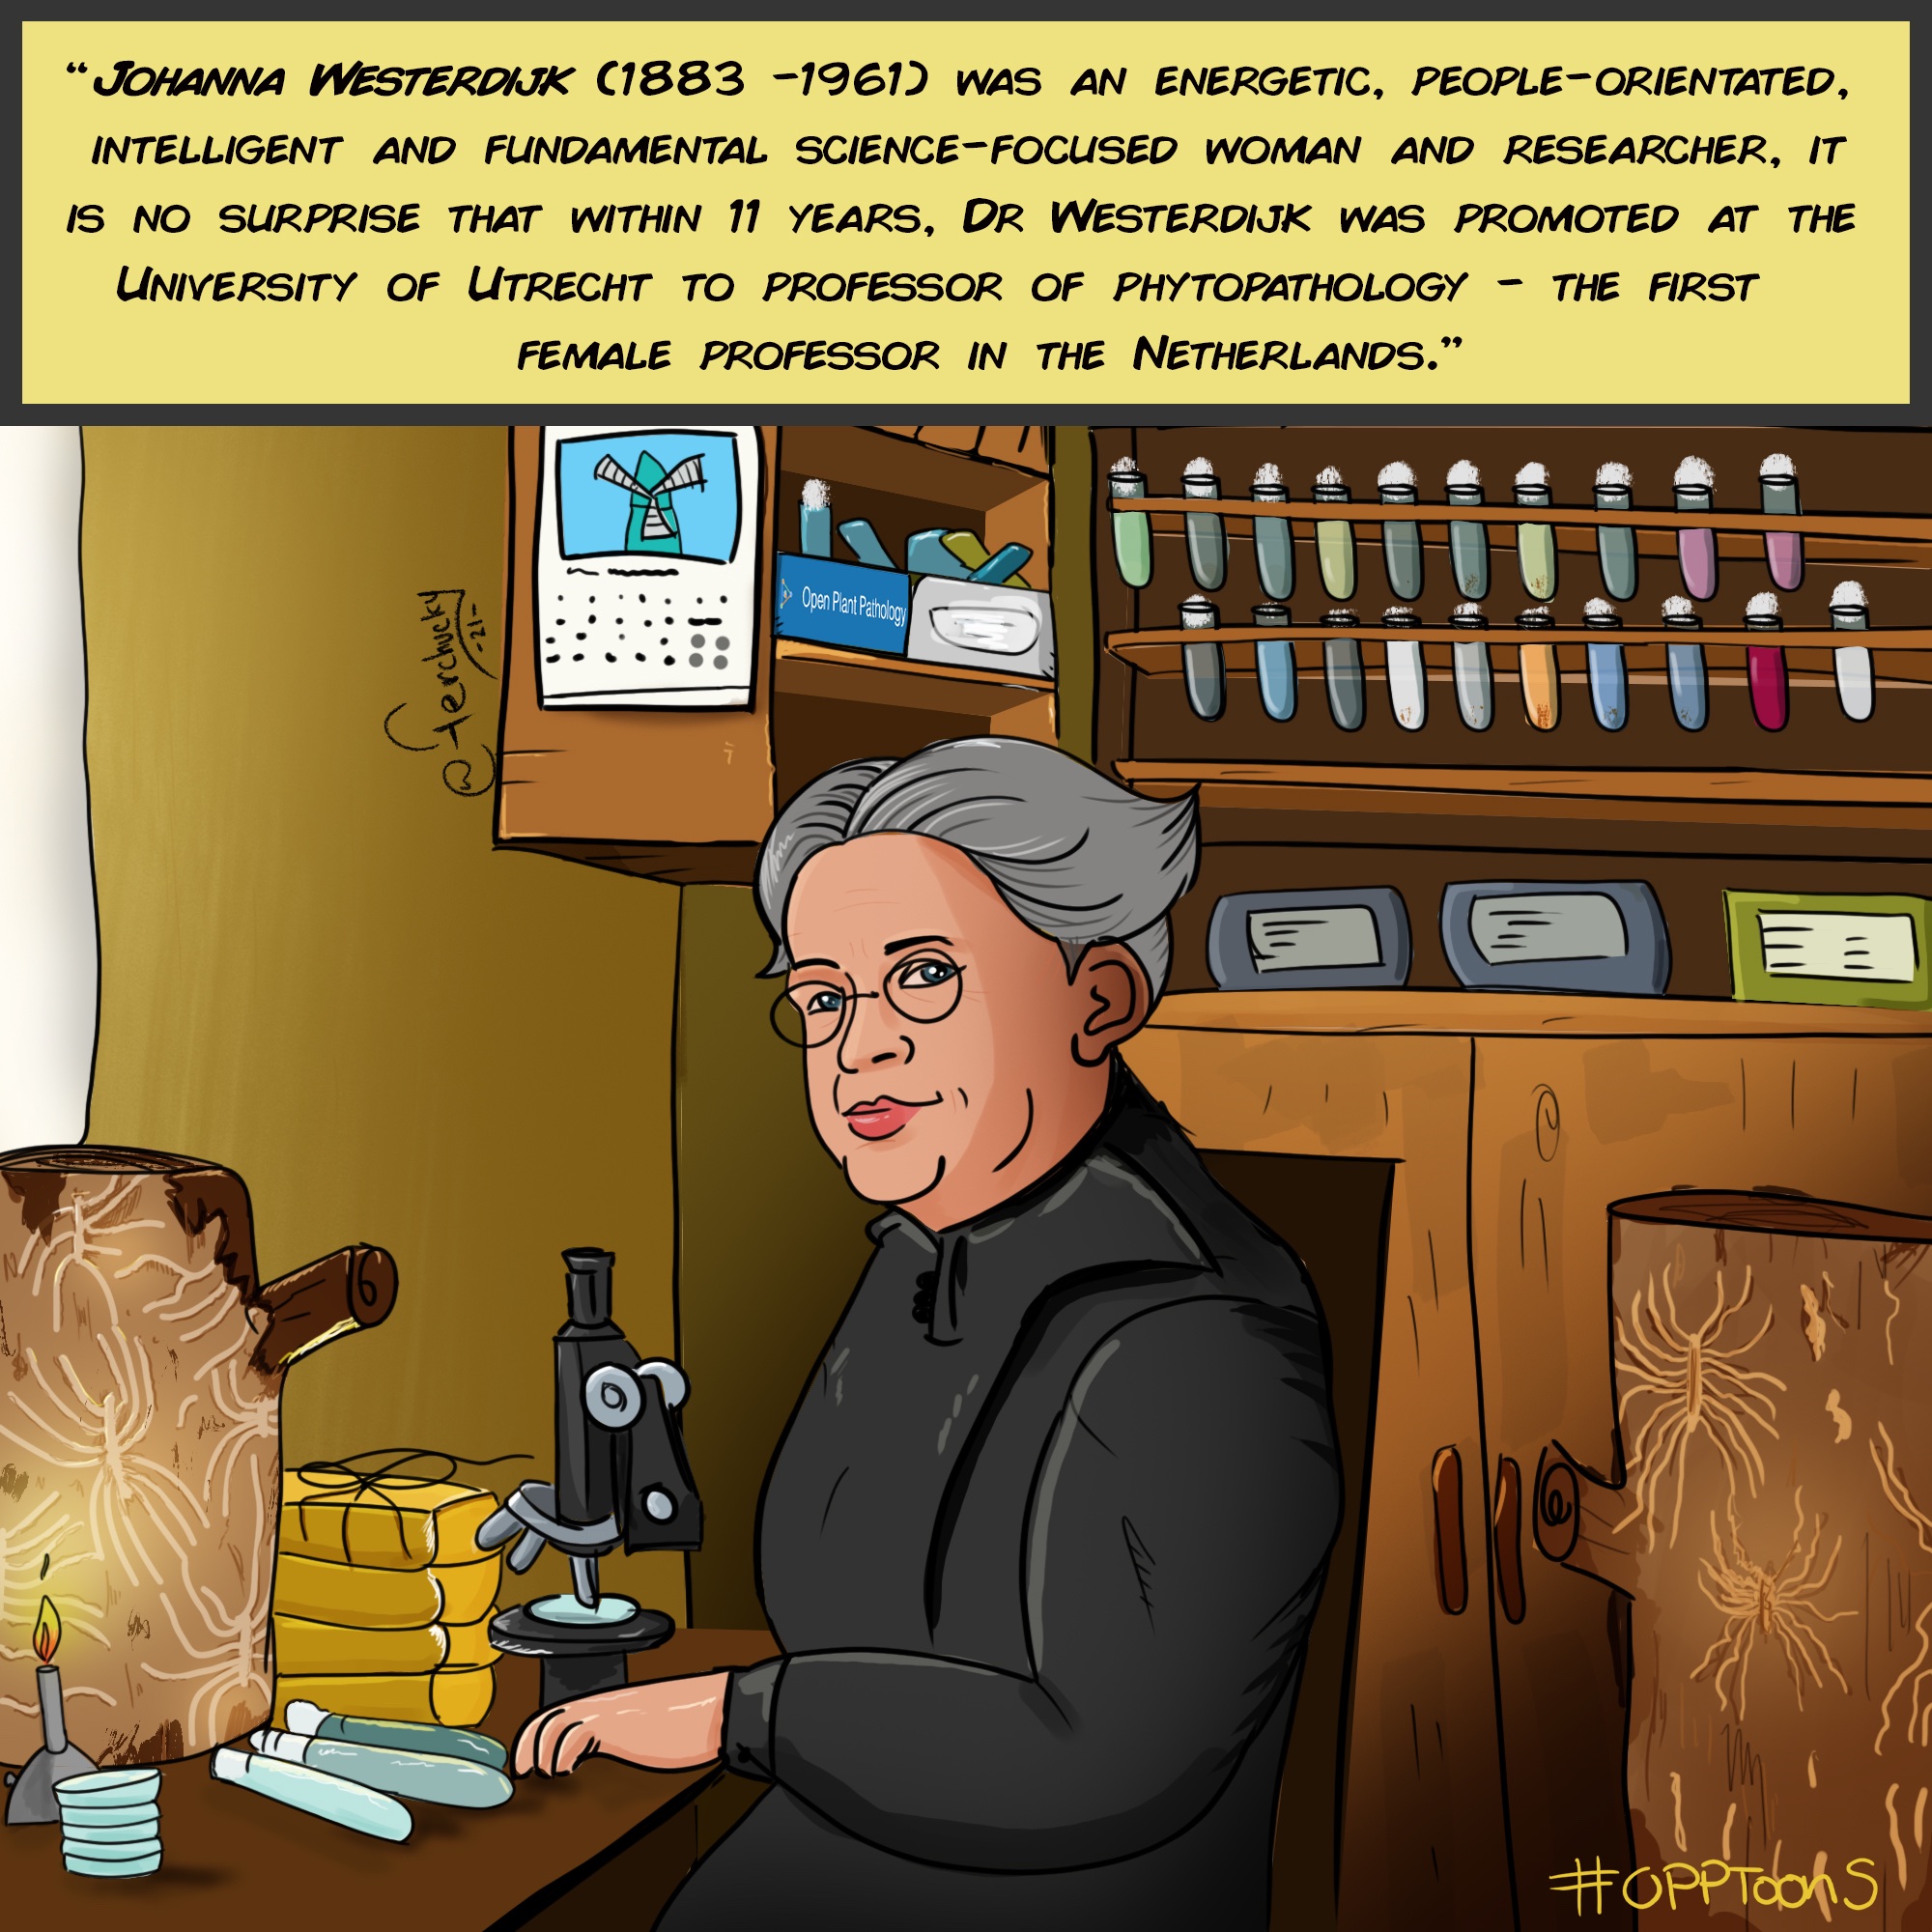 Cartoon of Johanna Westerdijk inspecting samples in laboratory bench. Caption: Johanna Westerdijk (1883-1961) was an energetic, people-oriented, intelligent and fundamental science-focused oriented woman and researcher. It is not surprise that within 11 years, Dr. Westerdijk was promoted at the University of Utrecht to Prof. of Phytopathology - the first female Professor in the Netherlands